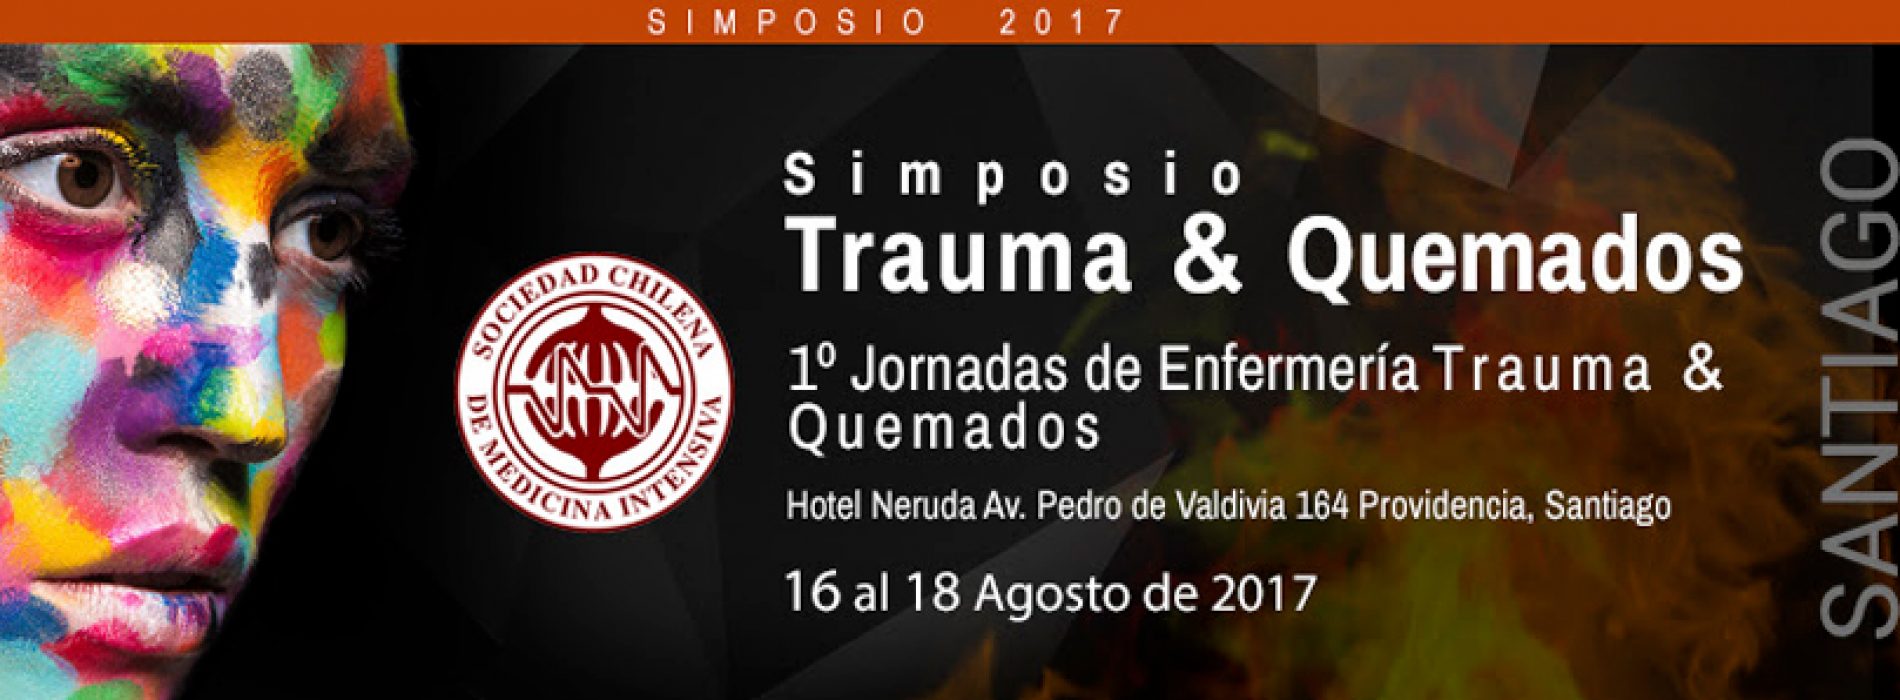 Inscriptions Symposium "Trauma and burned" 16 to 18 August 2017